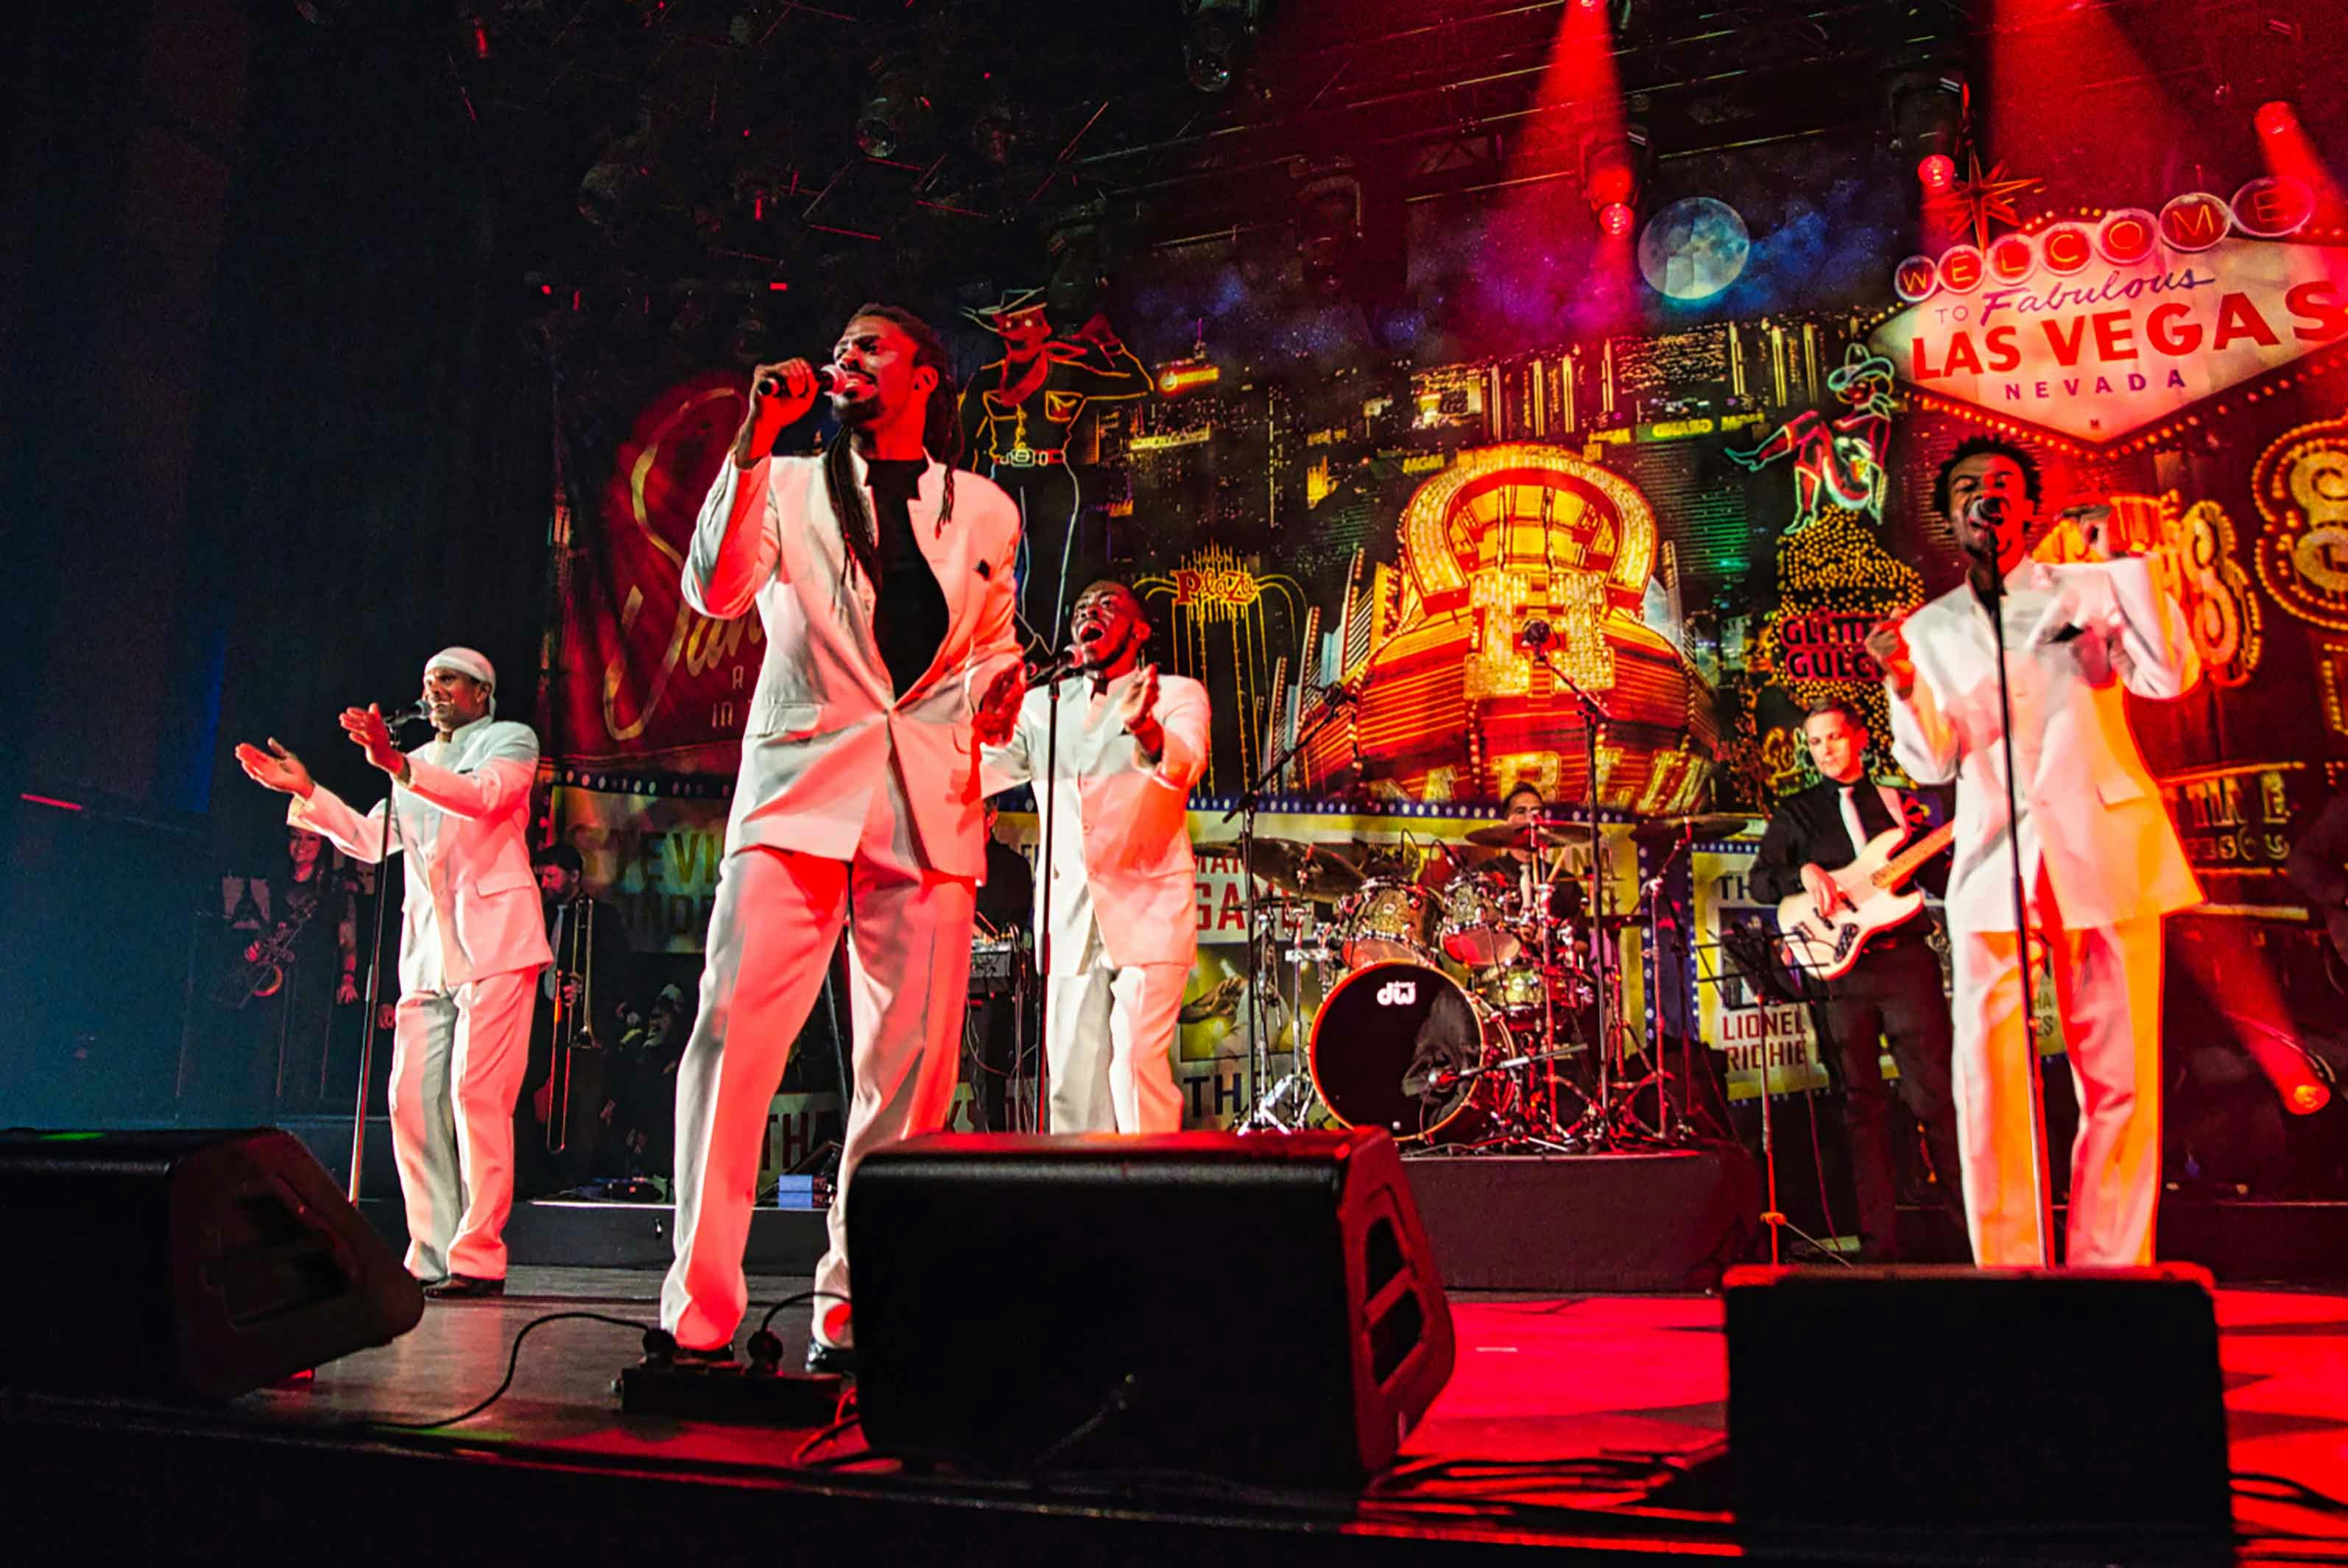 A six piece band line a stage all wearing white suits. There are four singers, a drummer and a guitarist. Las Vegas lights are the backdrop to the stage.